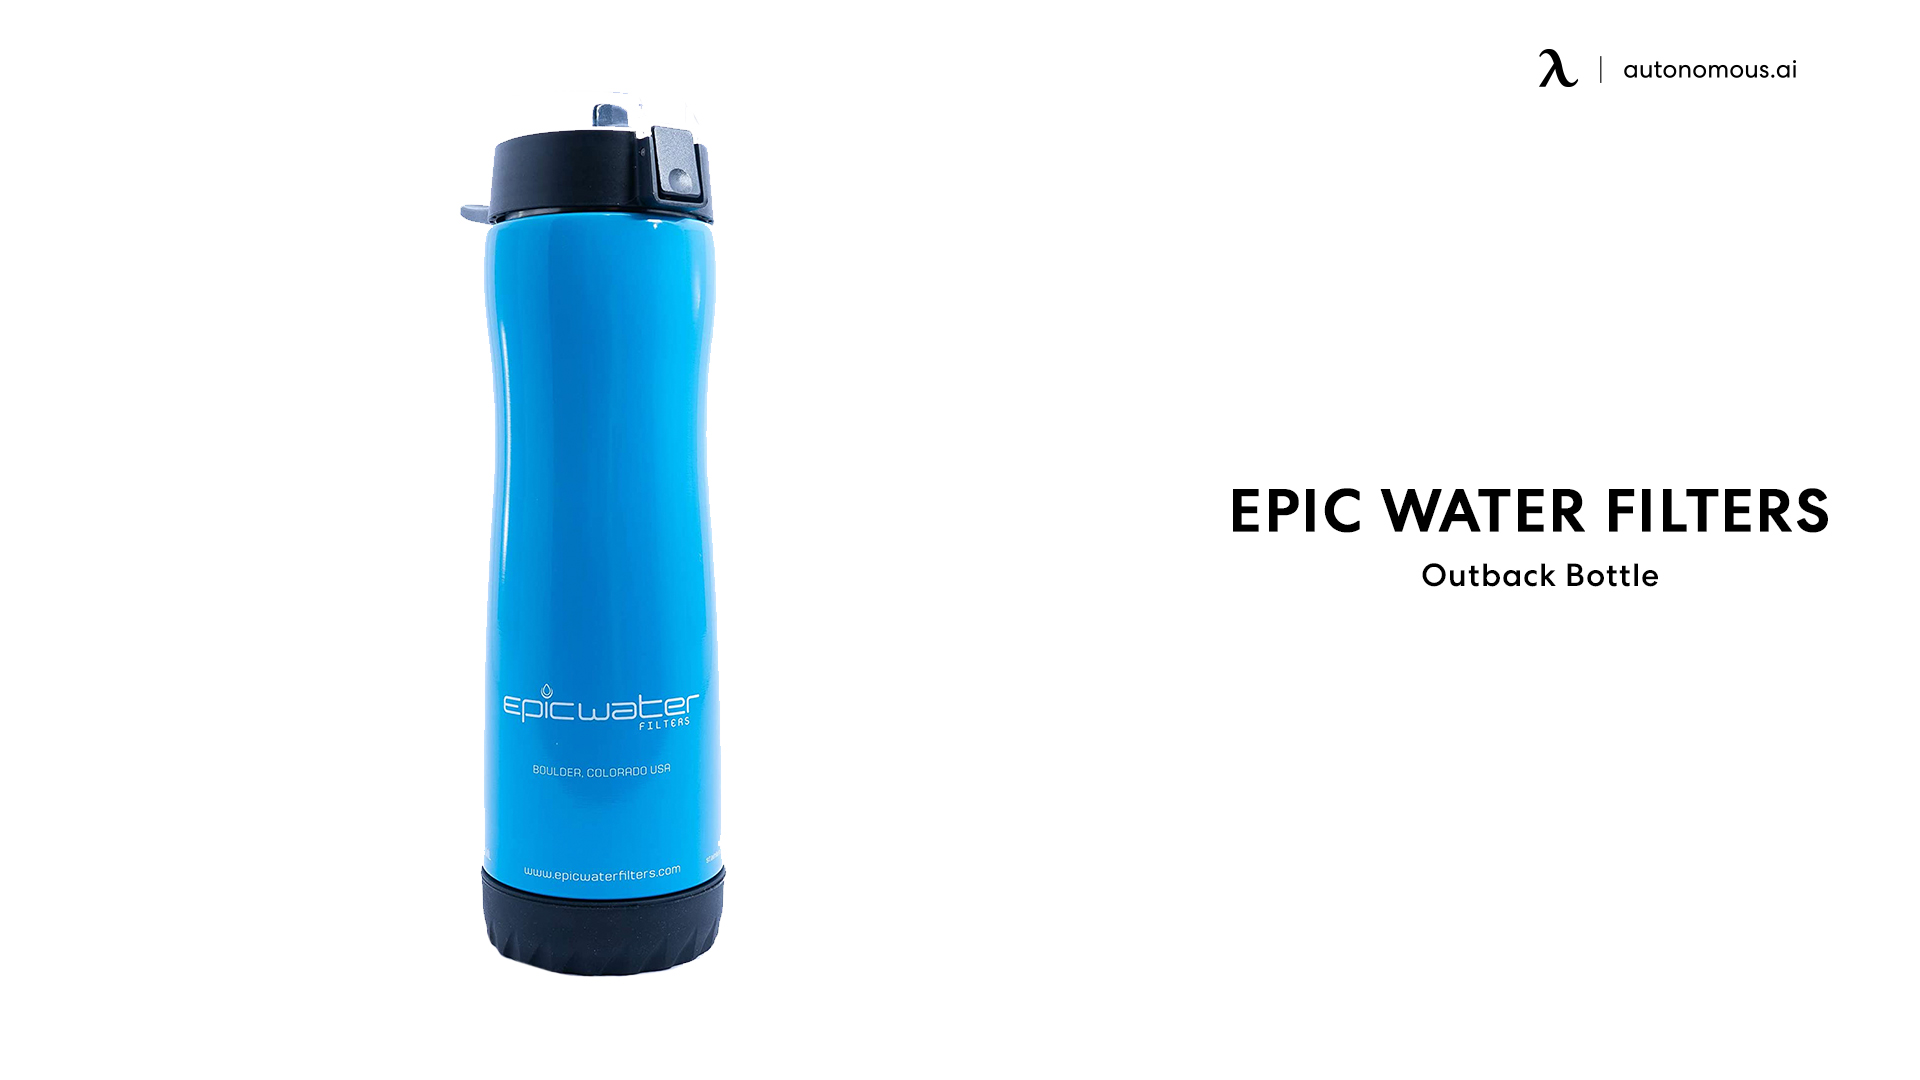 Outback Bottle with Epic Water Filters